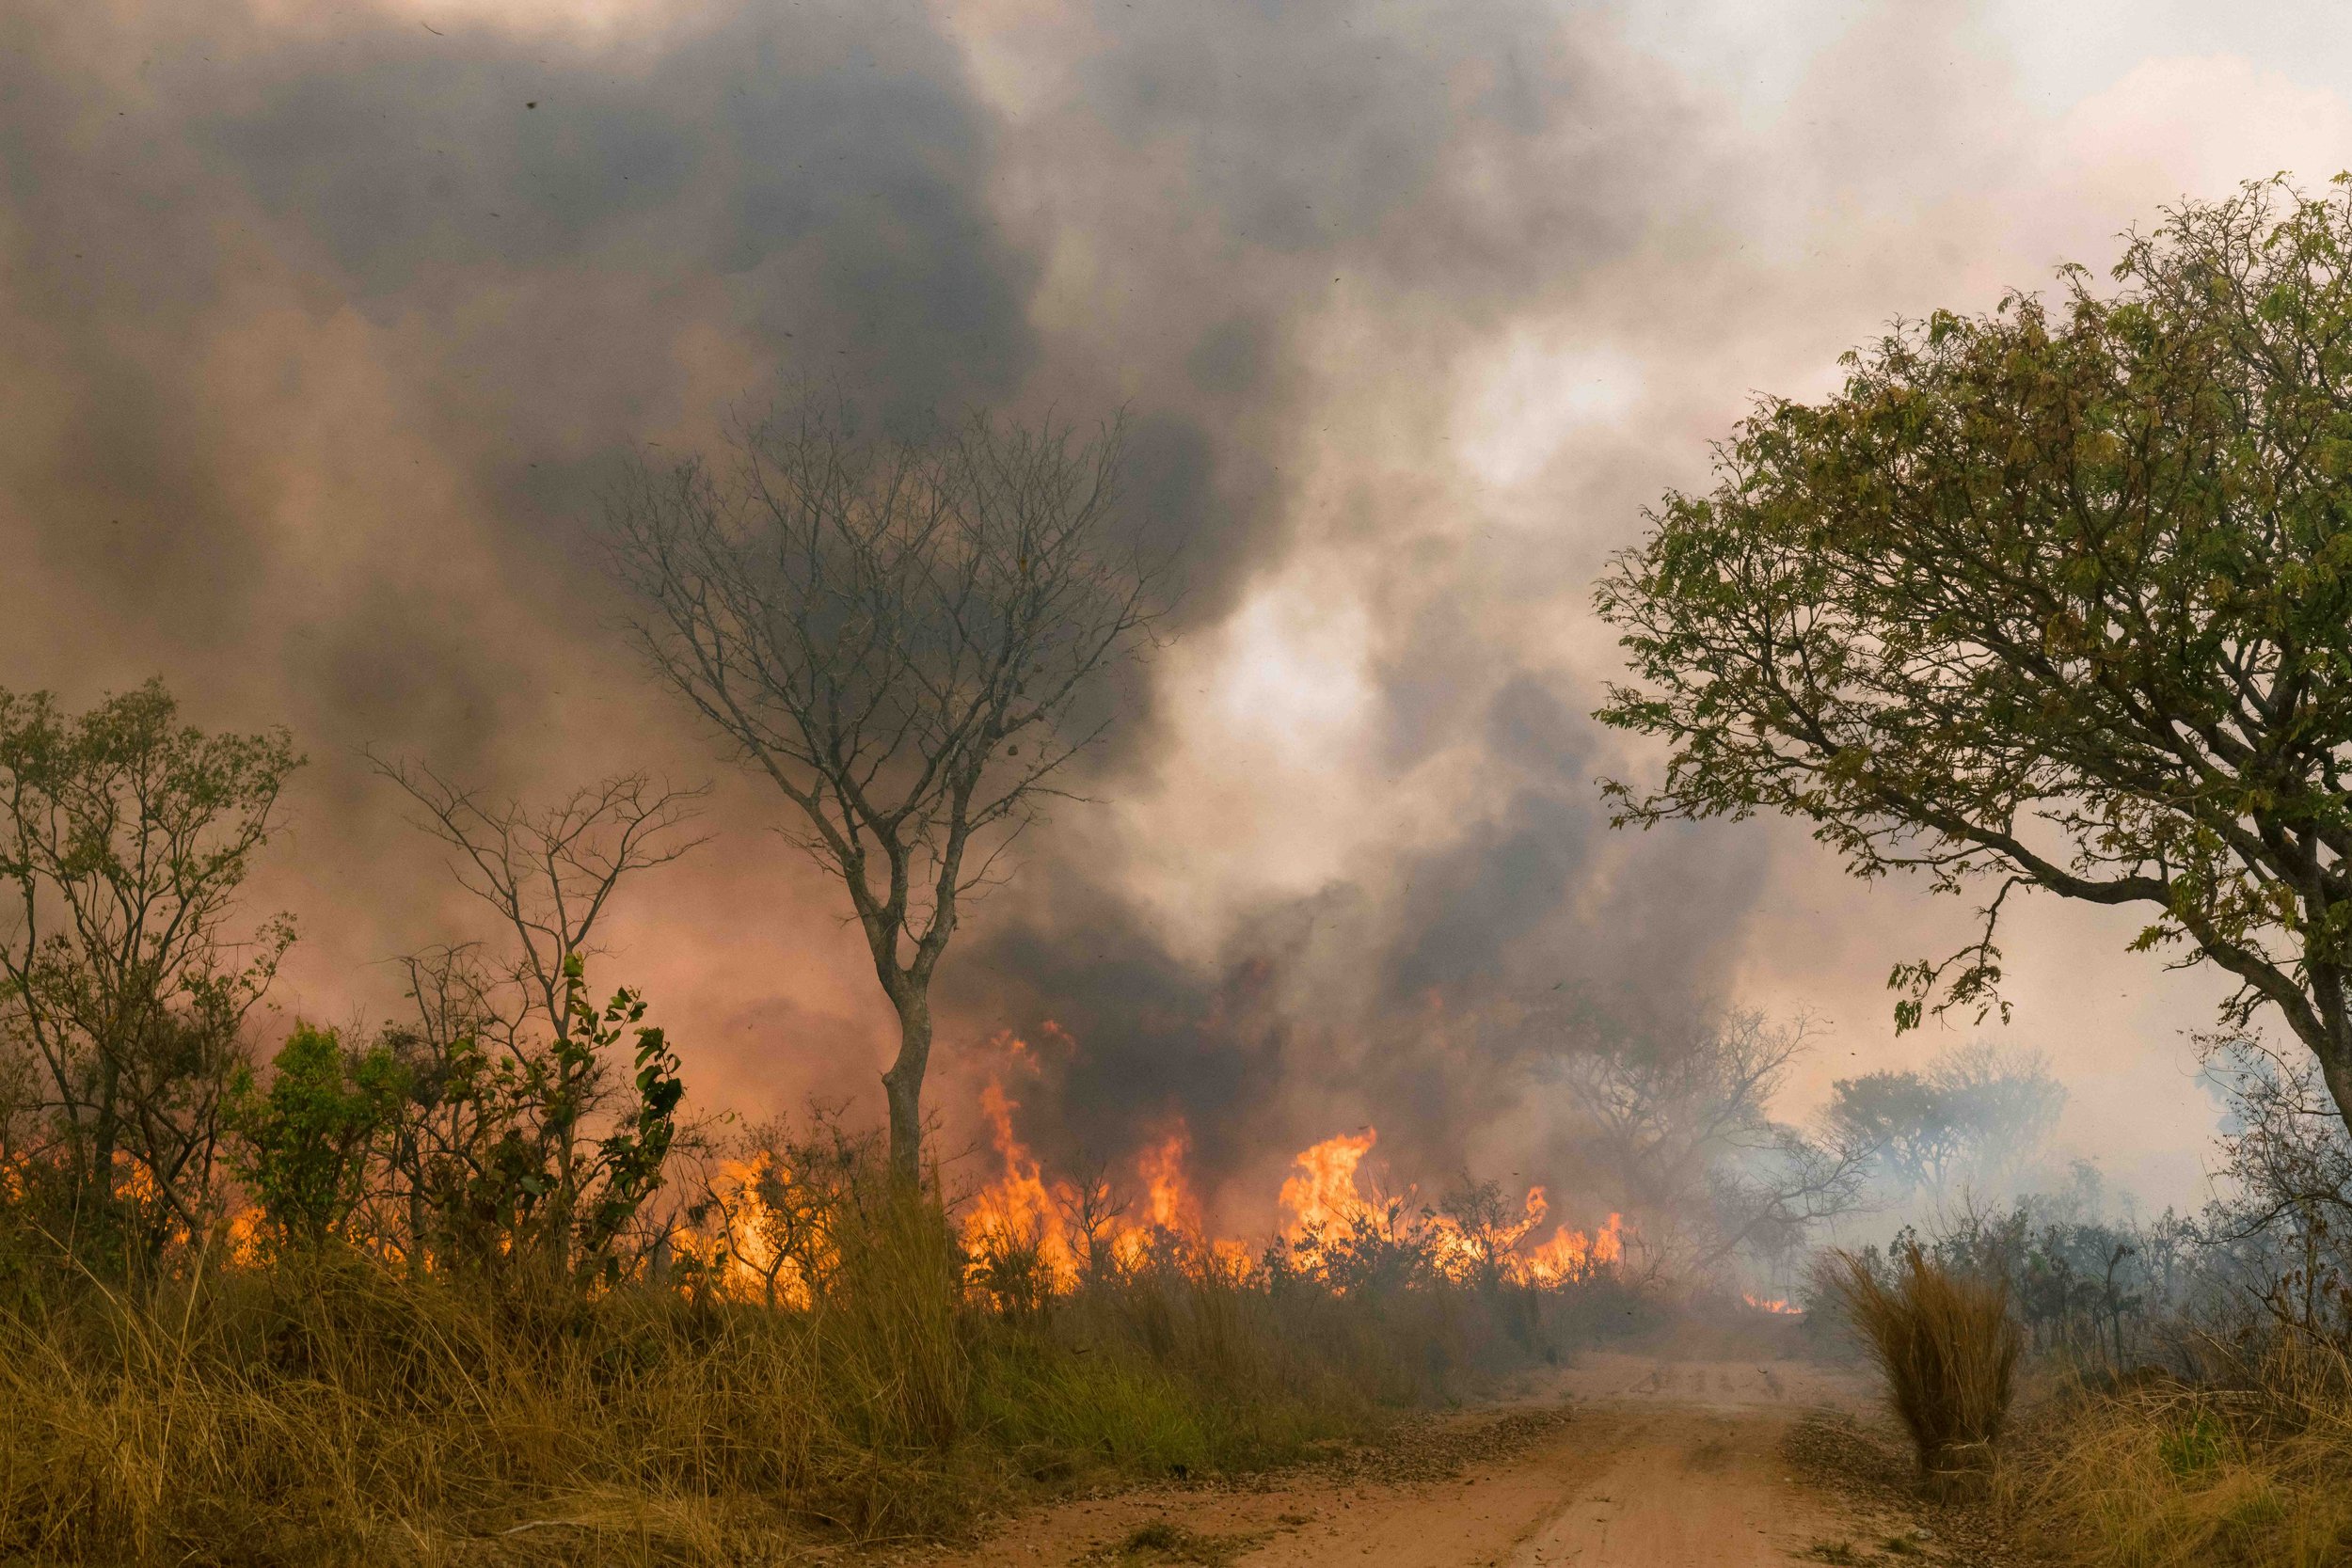  Afram Plains: These fragile ecosystems are at risk from bush burning and selling of charcoal. Bush fires are nothing new but unfortunately with climate change, the bush fires now get out of control and burn longer and hotter than in previous years. 